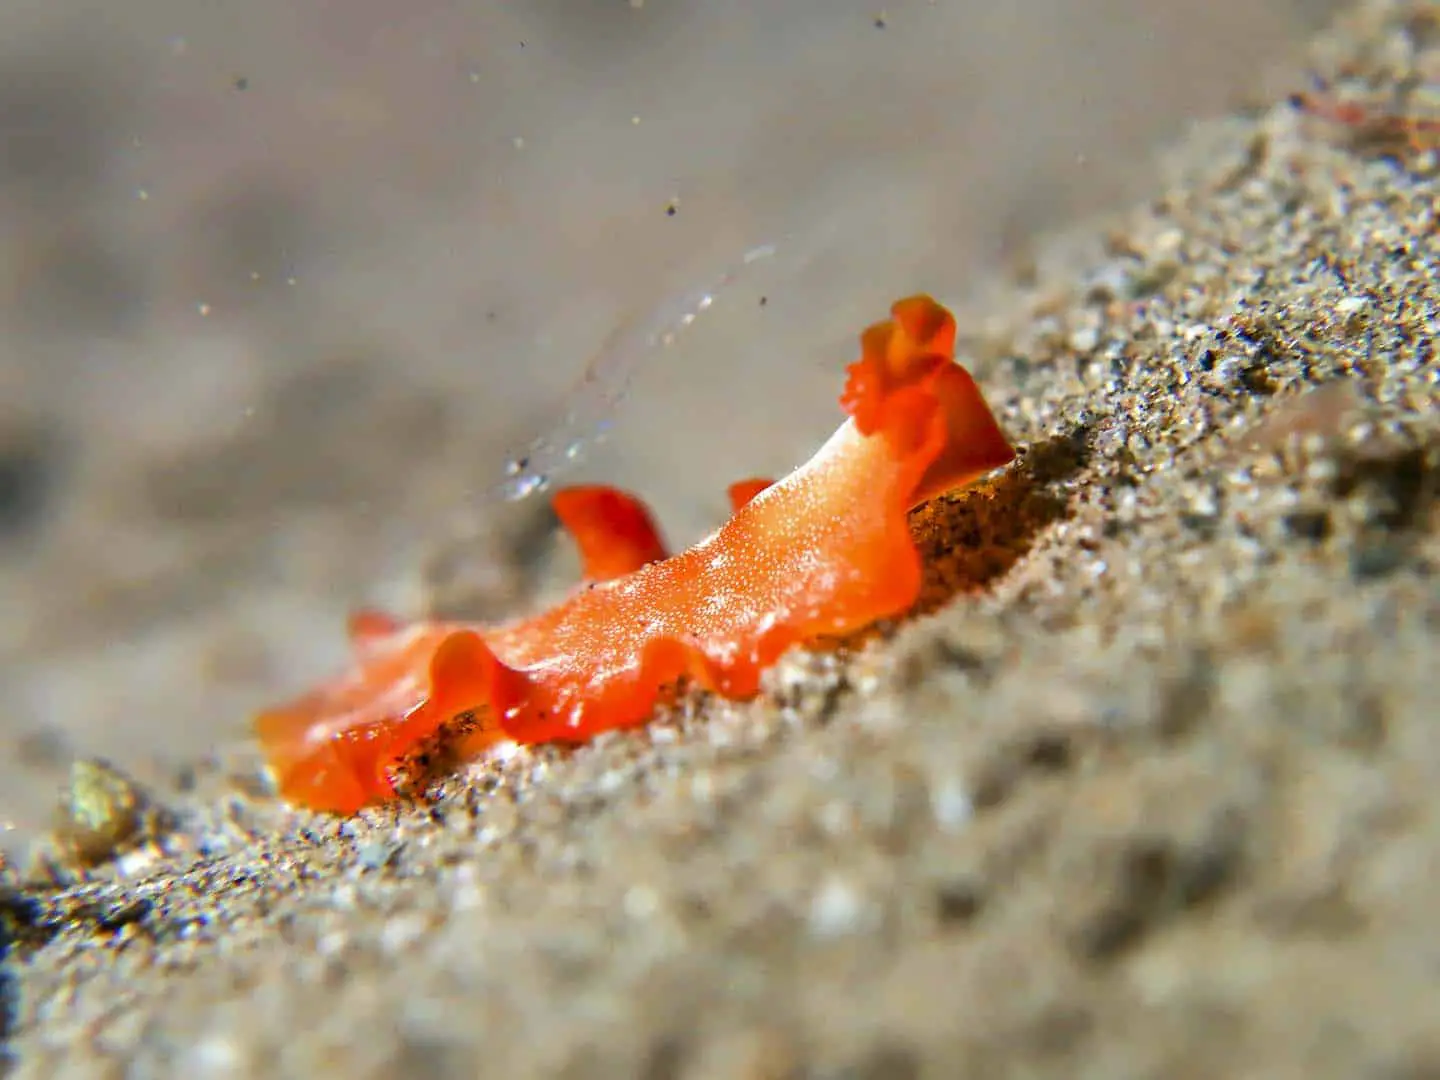 A shrimp and an orange flatworm spotted while scuba diving in Dauin